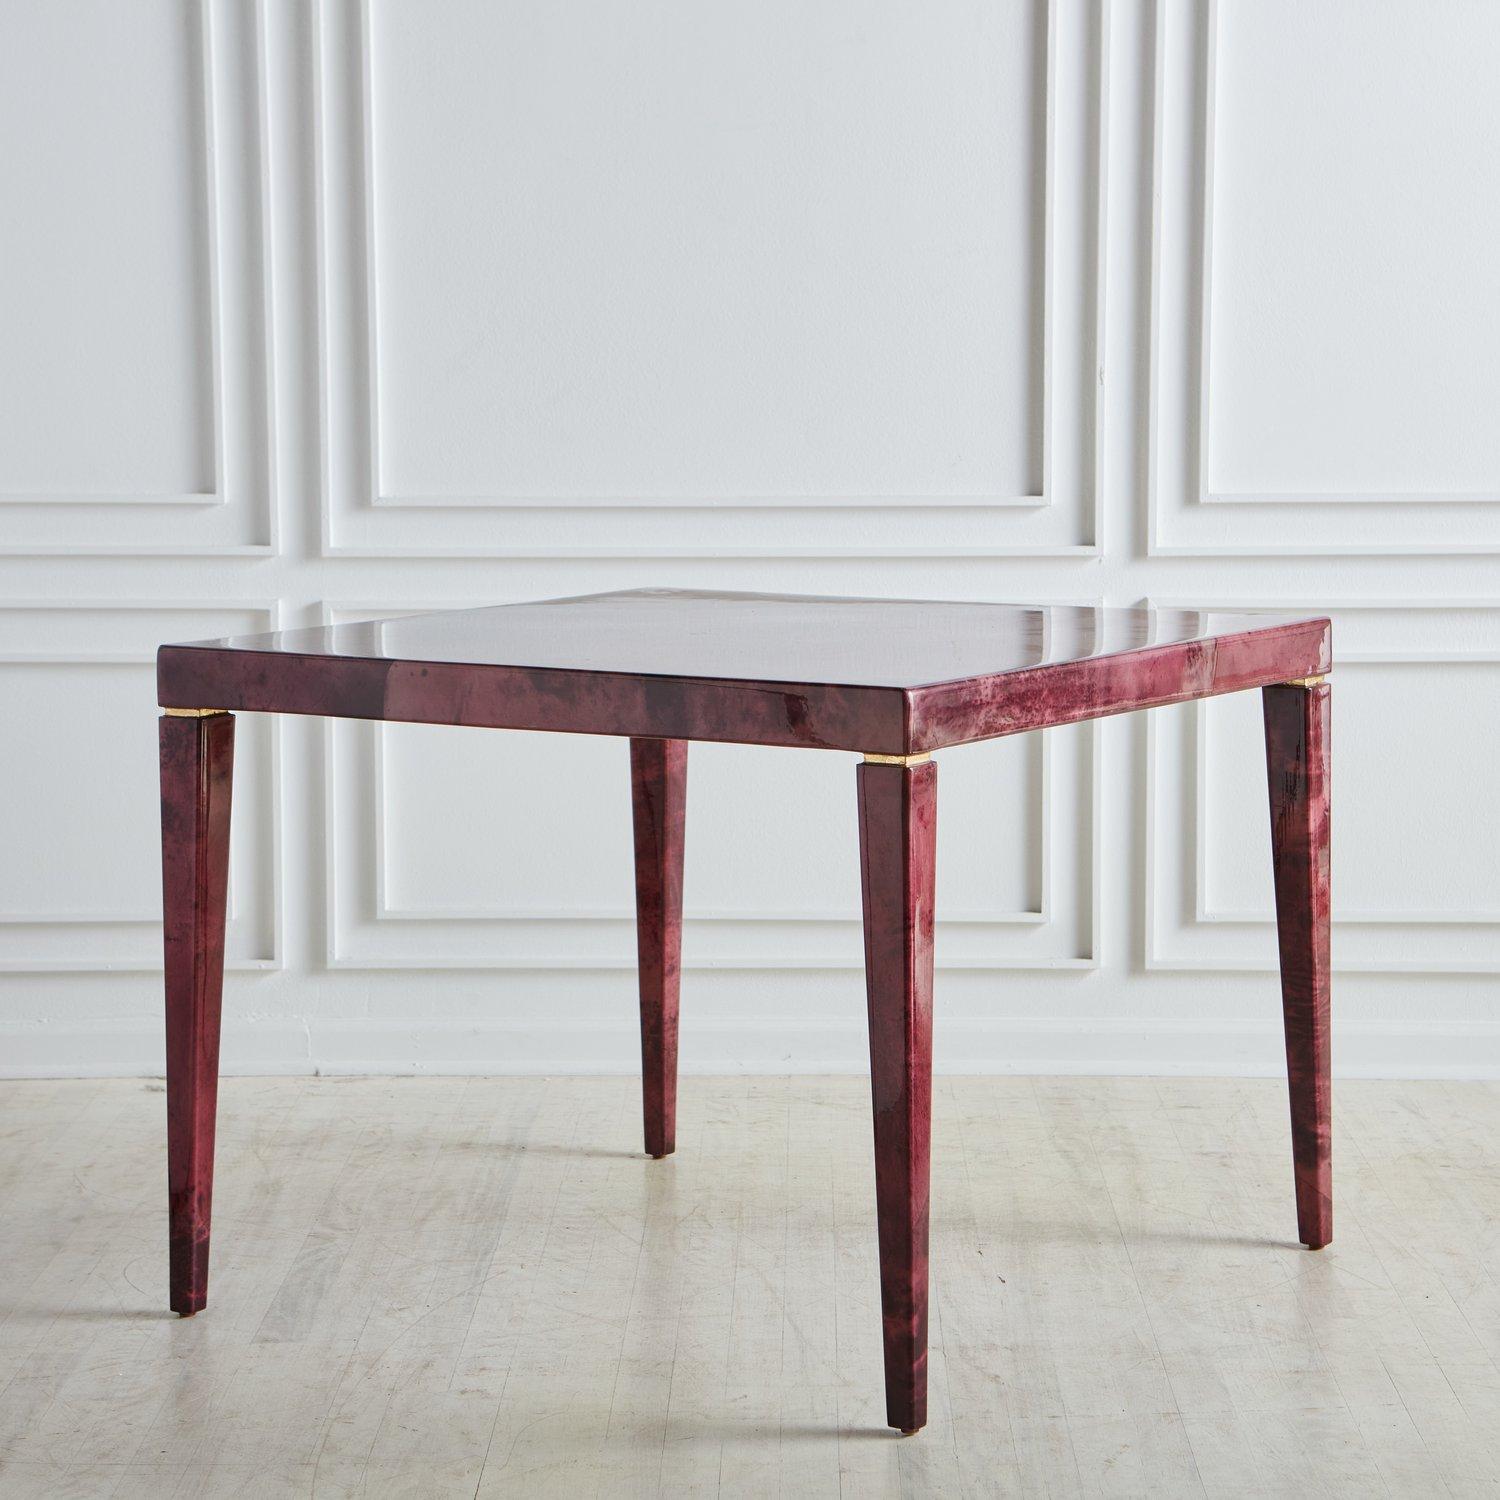 A captivating square dining table designed by Enrique Garcel. This table features a lacquered parchment finish dyed in a deep plum hue with natural patterns and subtle color variations. It stands on four square tapered legs with subtle hand applied